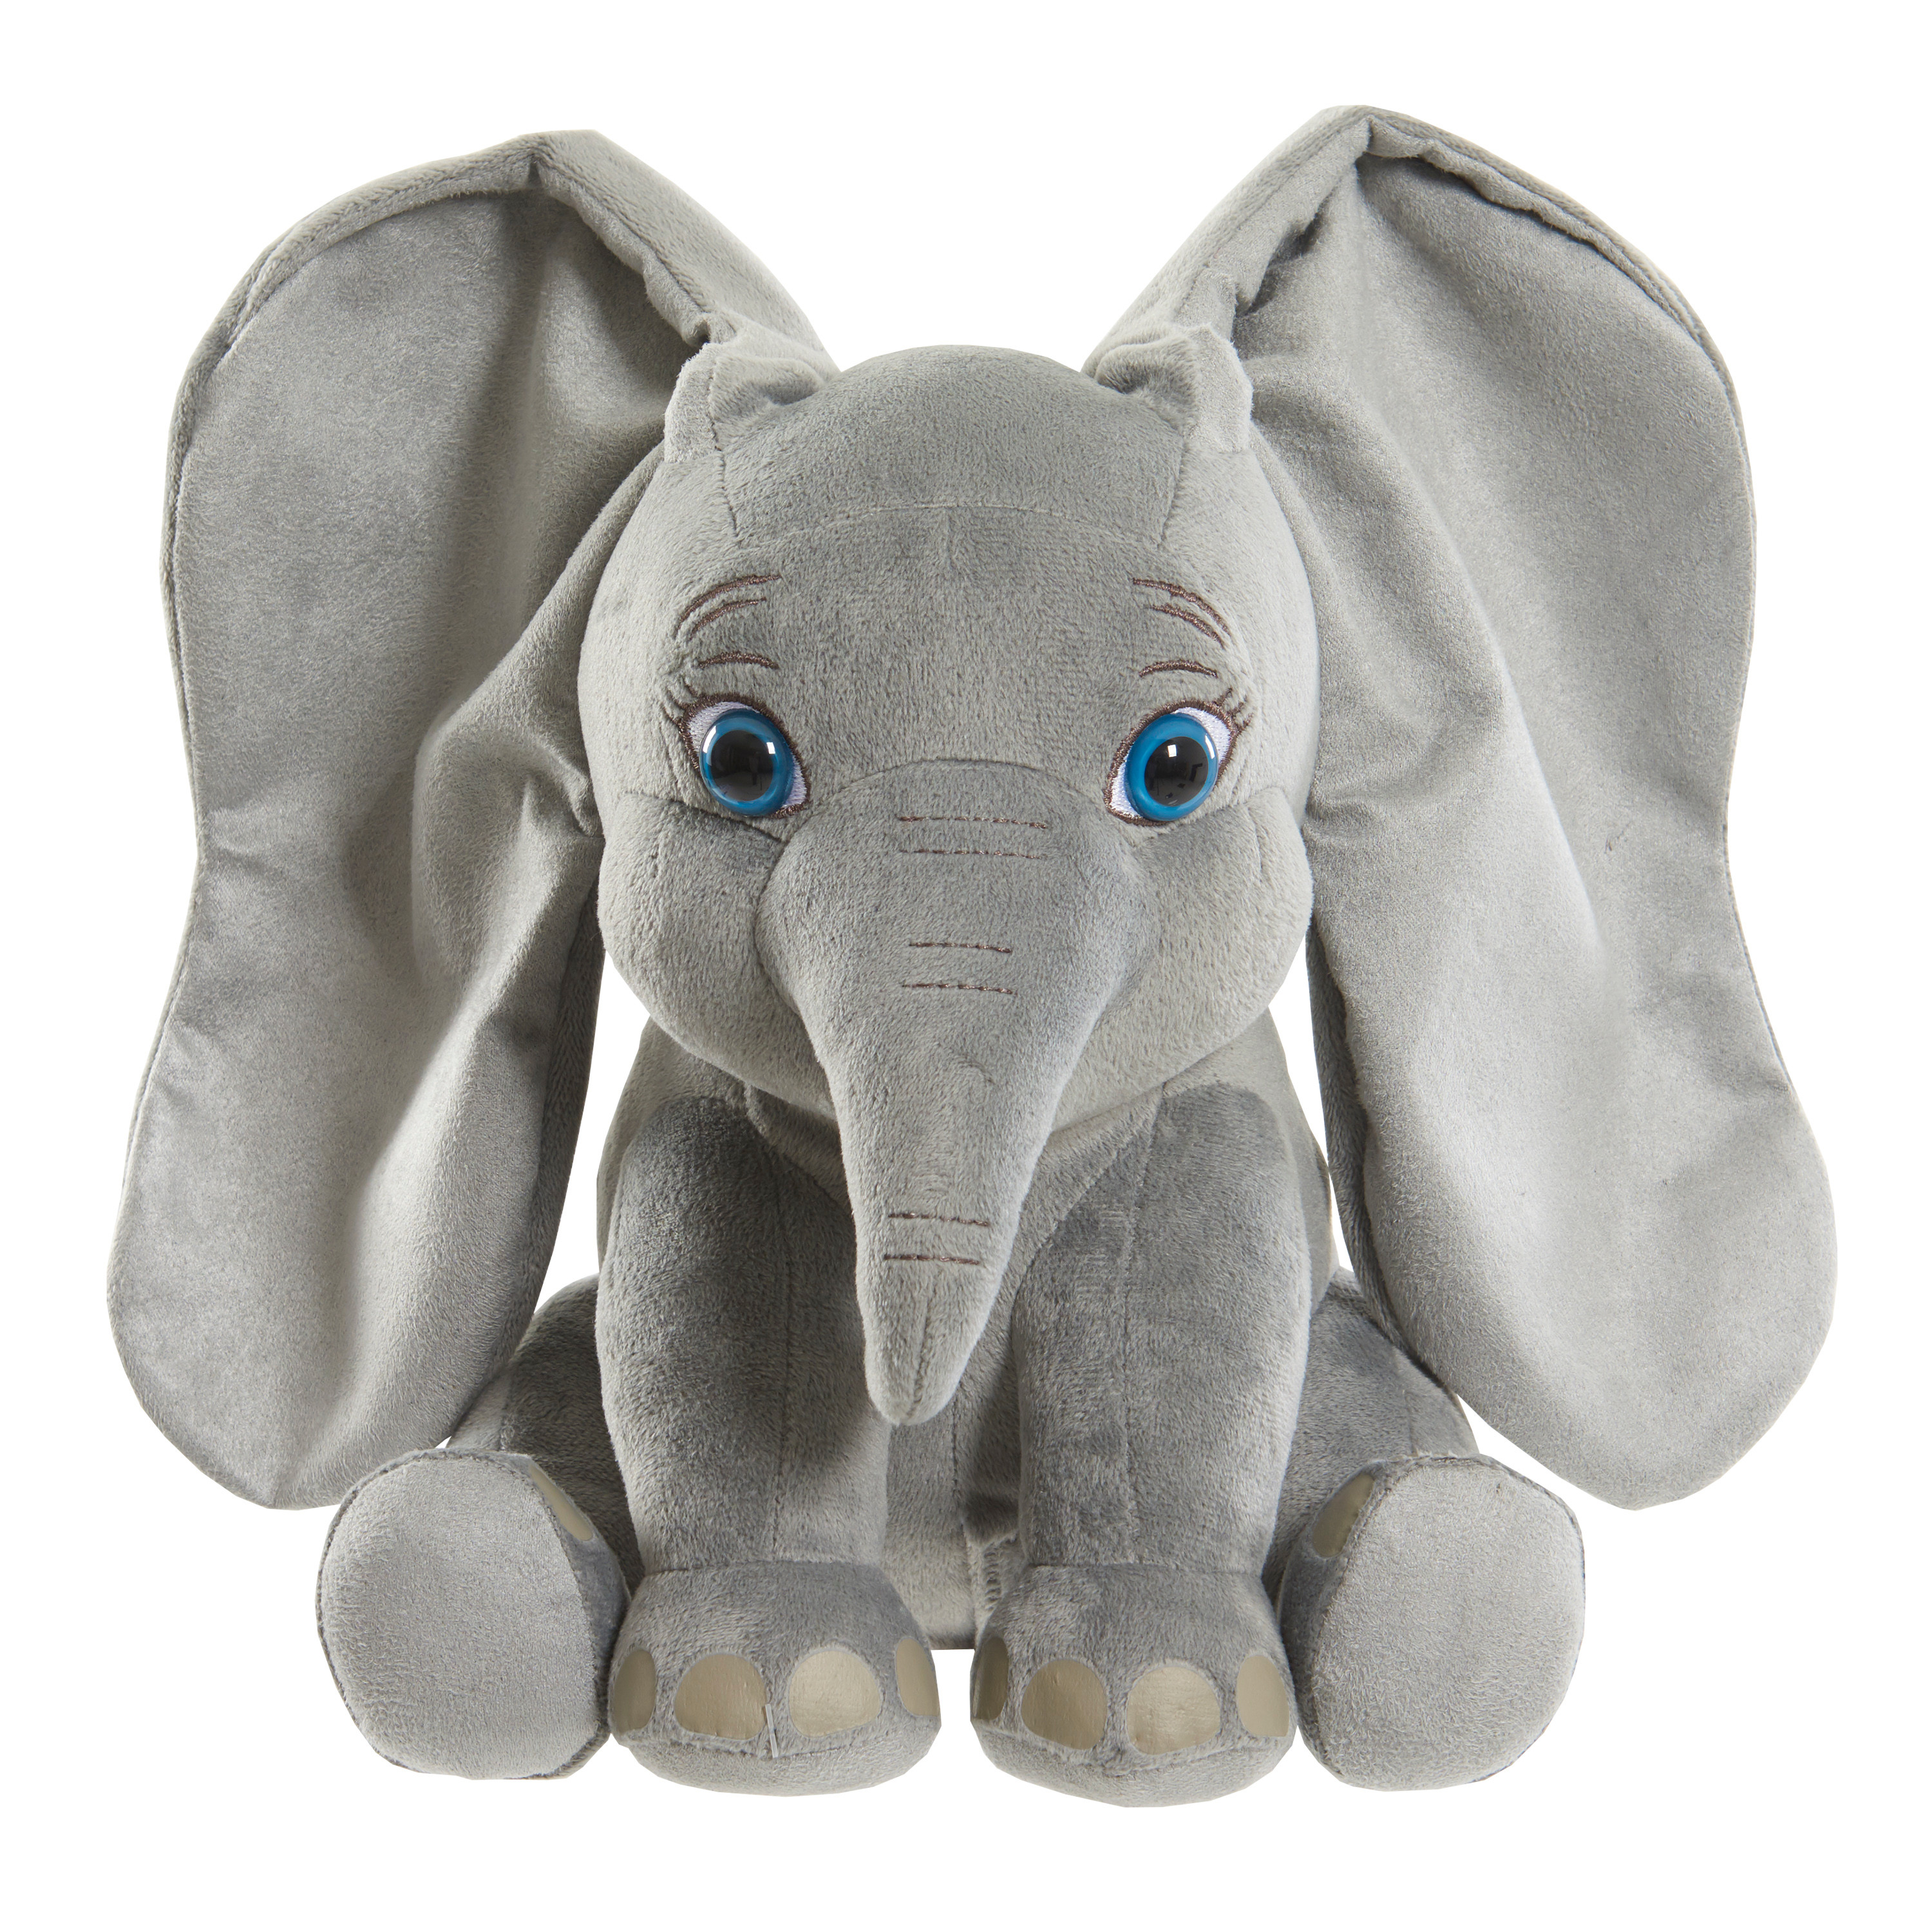 Disney's Dumbo Fluttering Ears, Dumbo, Officially Licensed Kids Toys for Ages 3 Up, Gifts and Presents - image 1 of 4